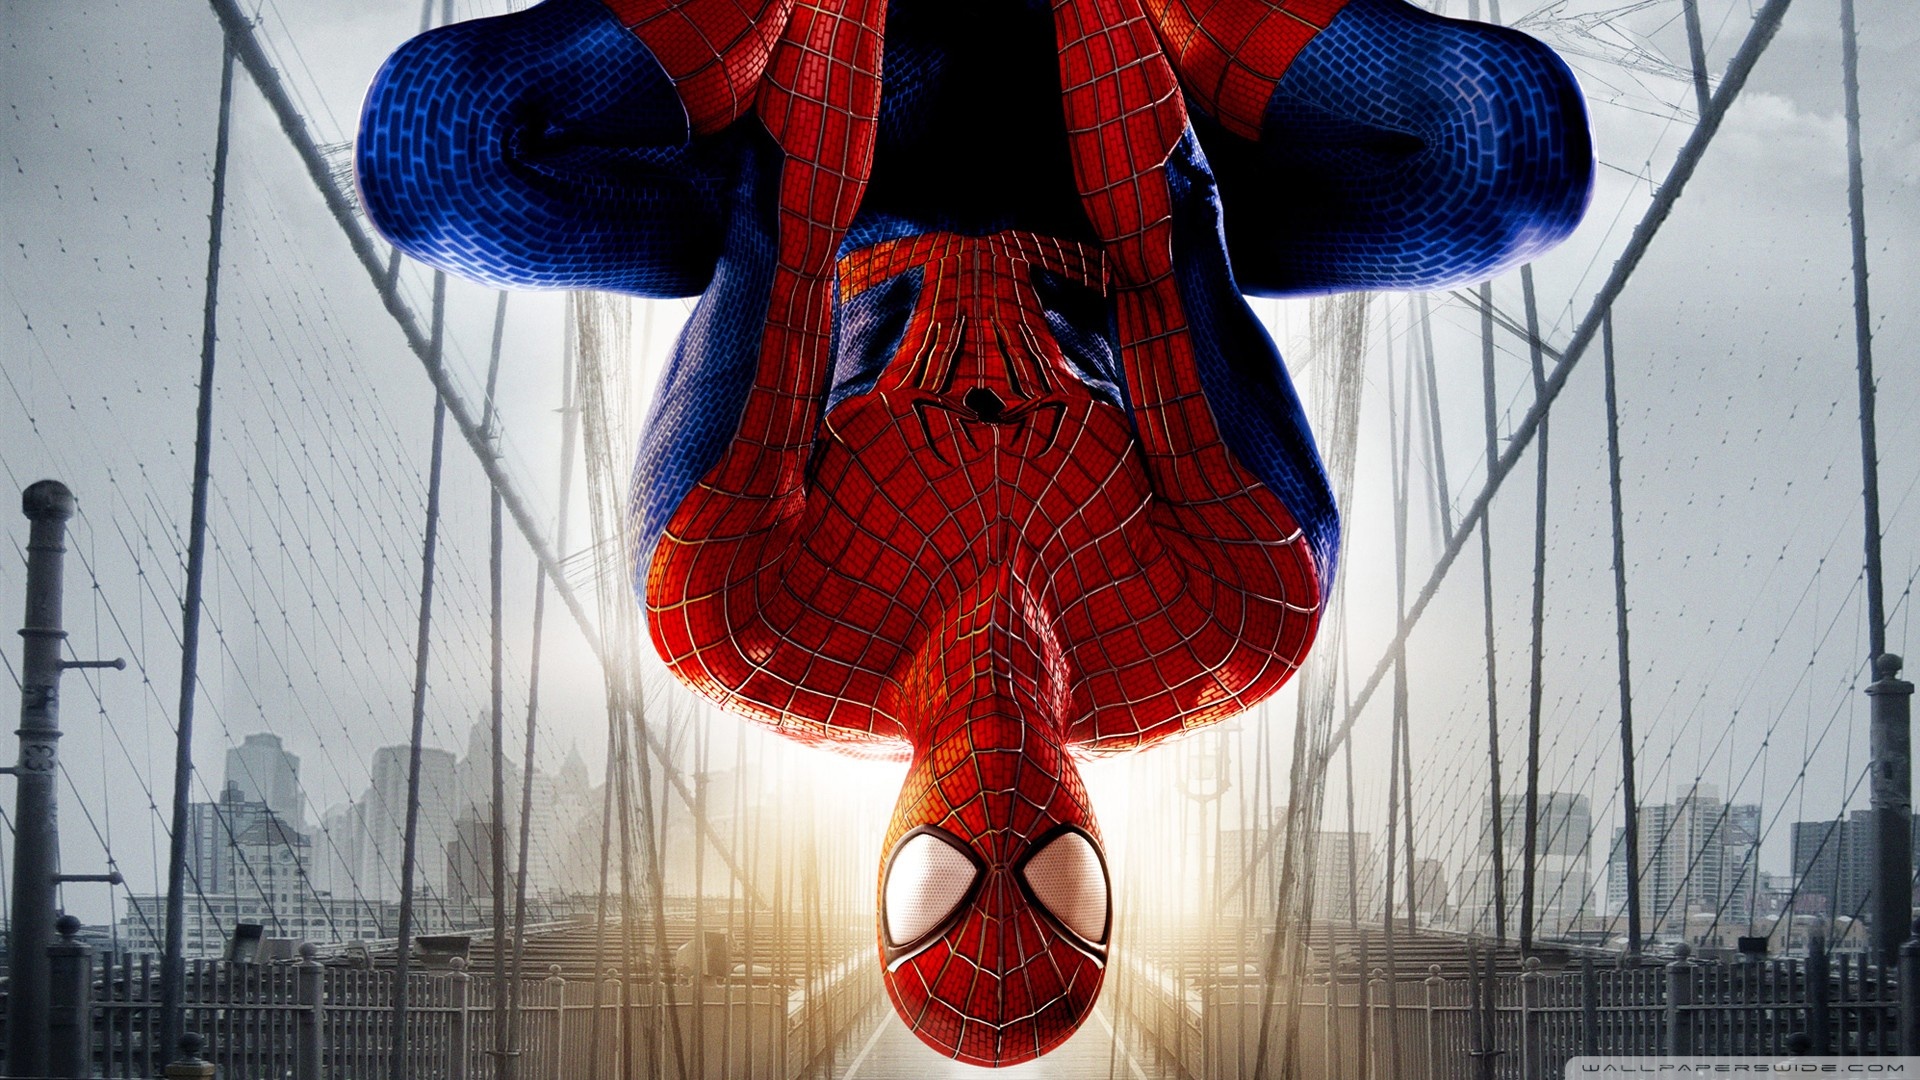 the amazing spider man wallpaper hd for windows 7